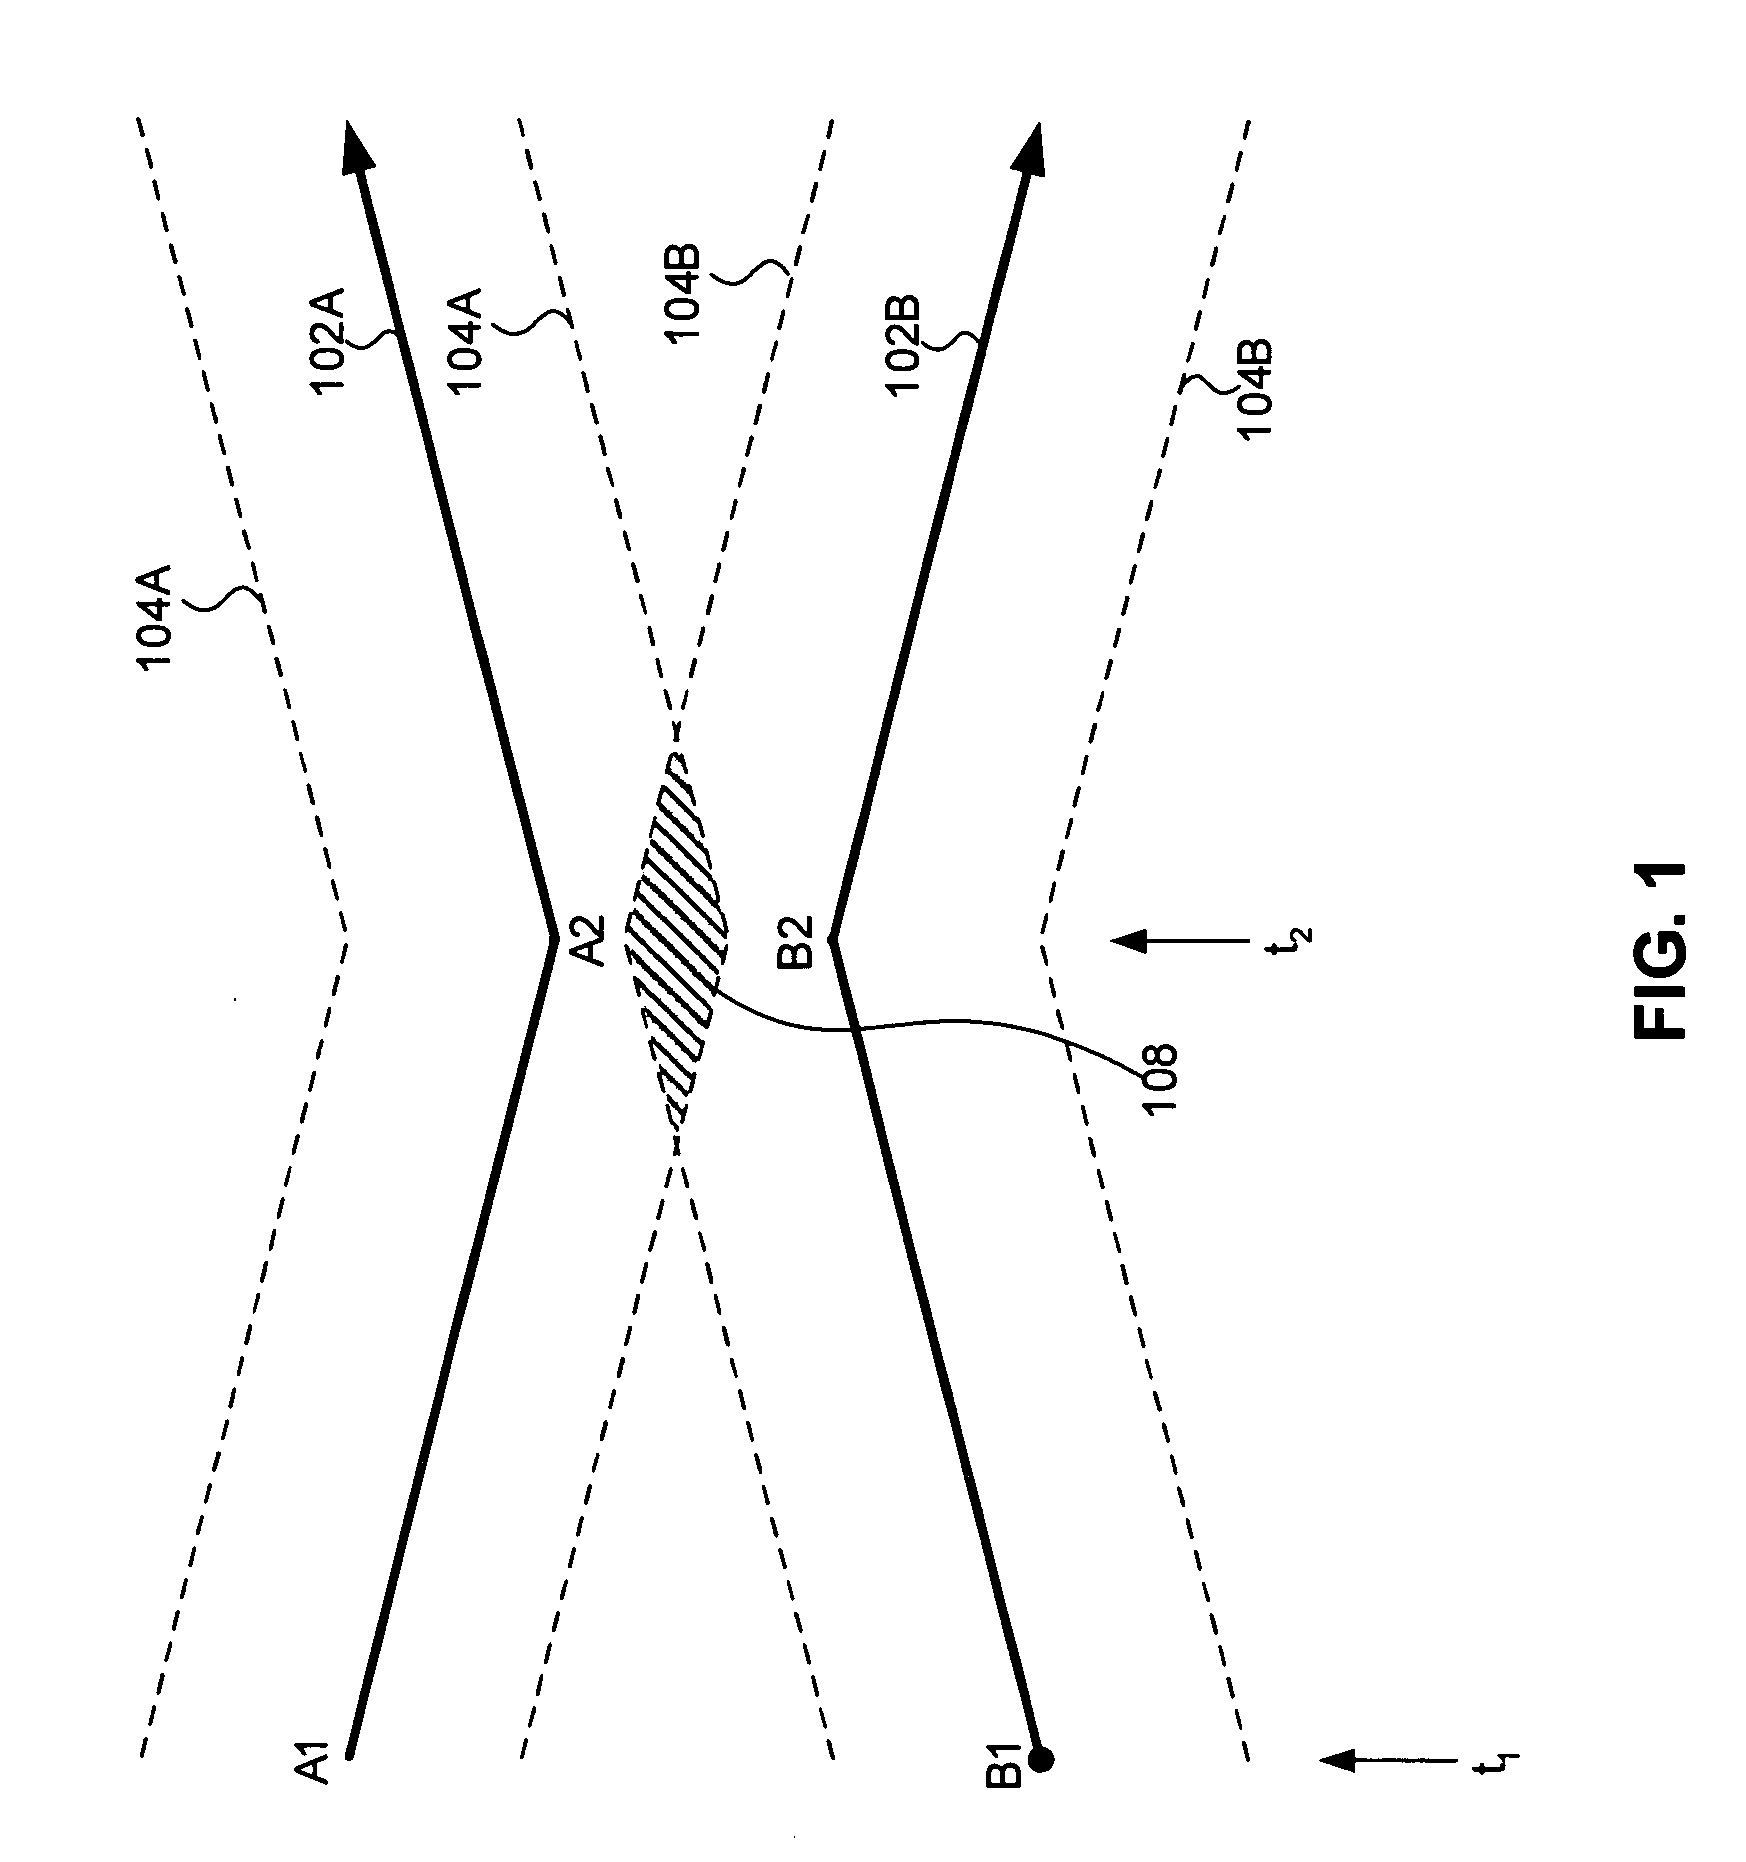 System and method for stochastic aircraft flight-path modeling